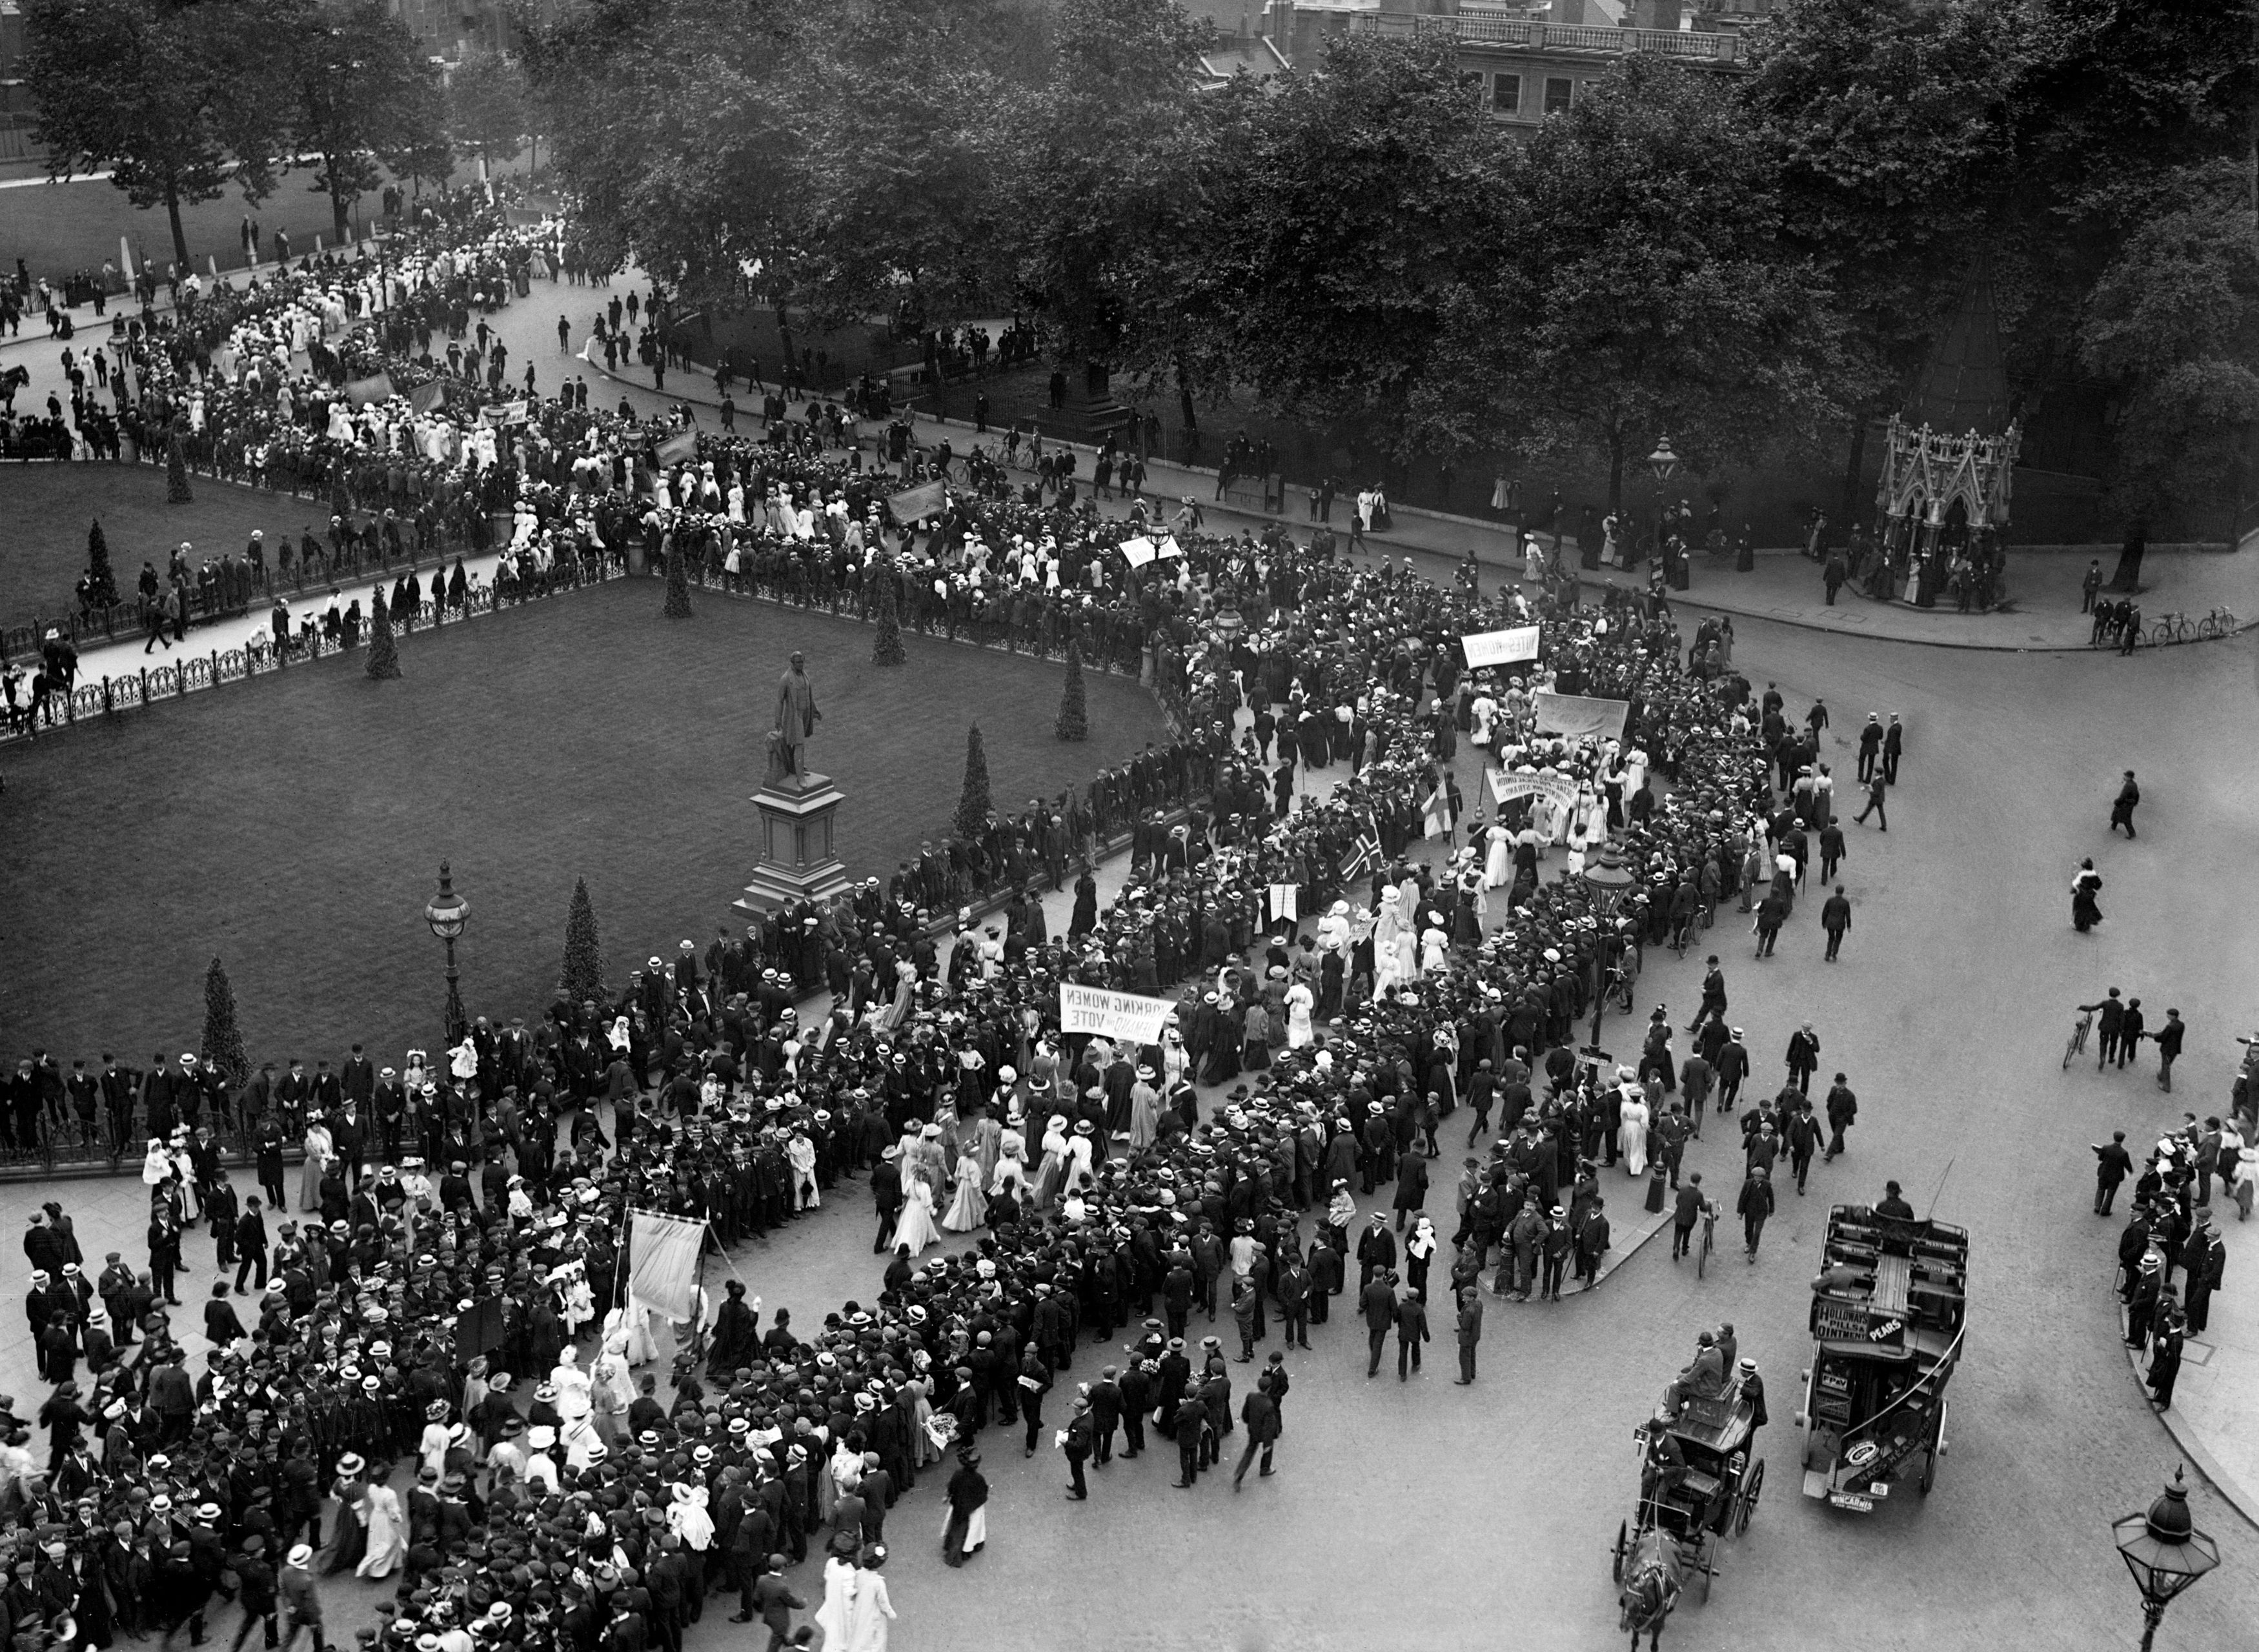 A suffragette procession passing through Parliament Square, London in 1908 (PA)